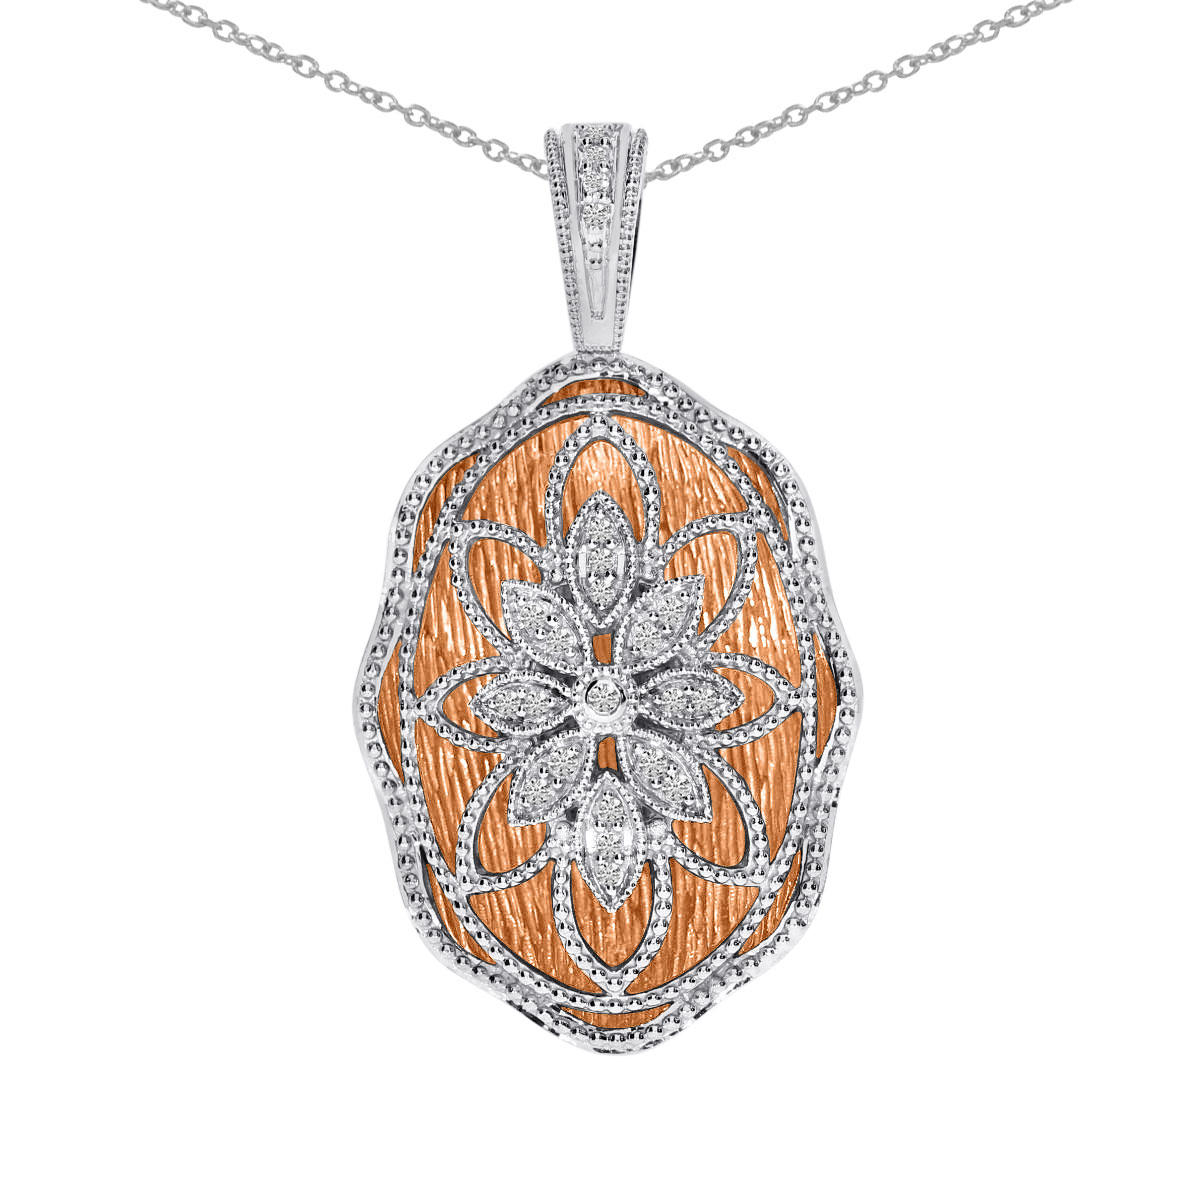 Antique style two-toned pendant with .15 total ct diamonds.